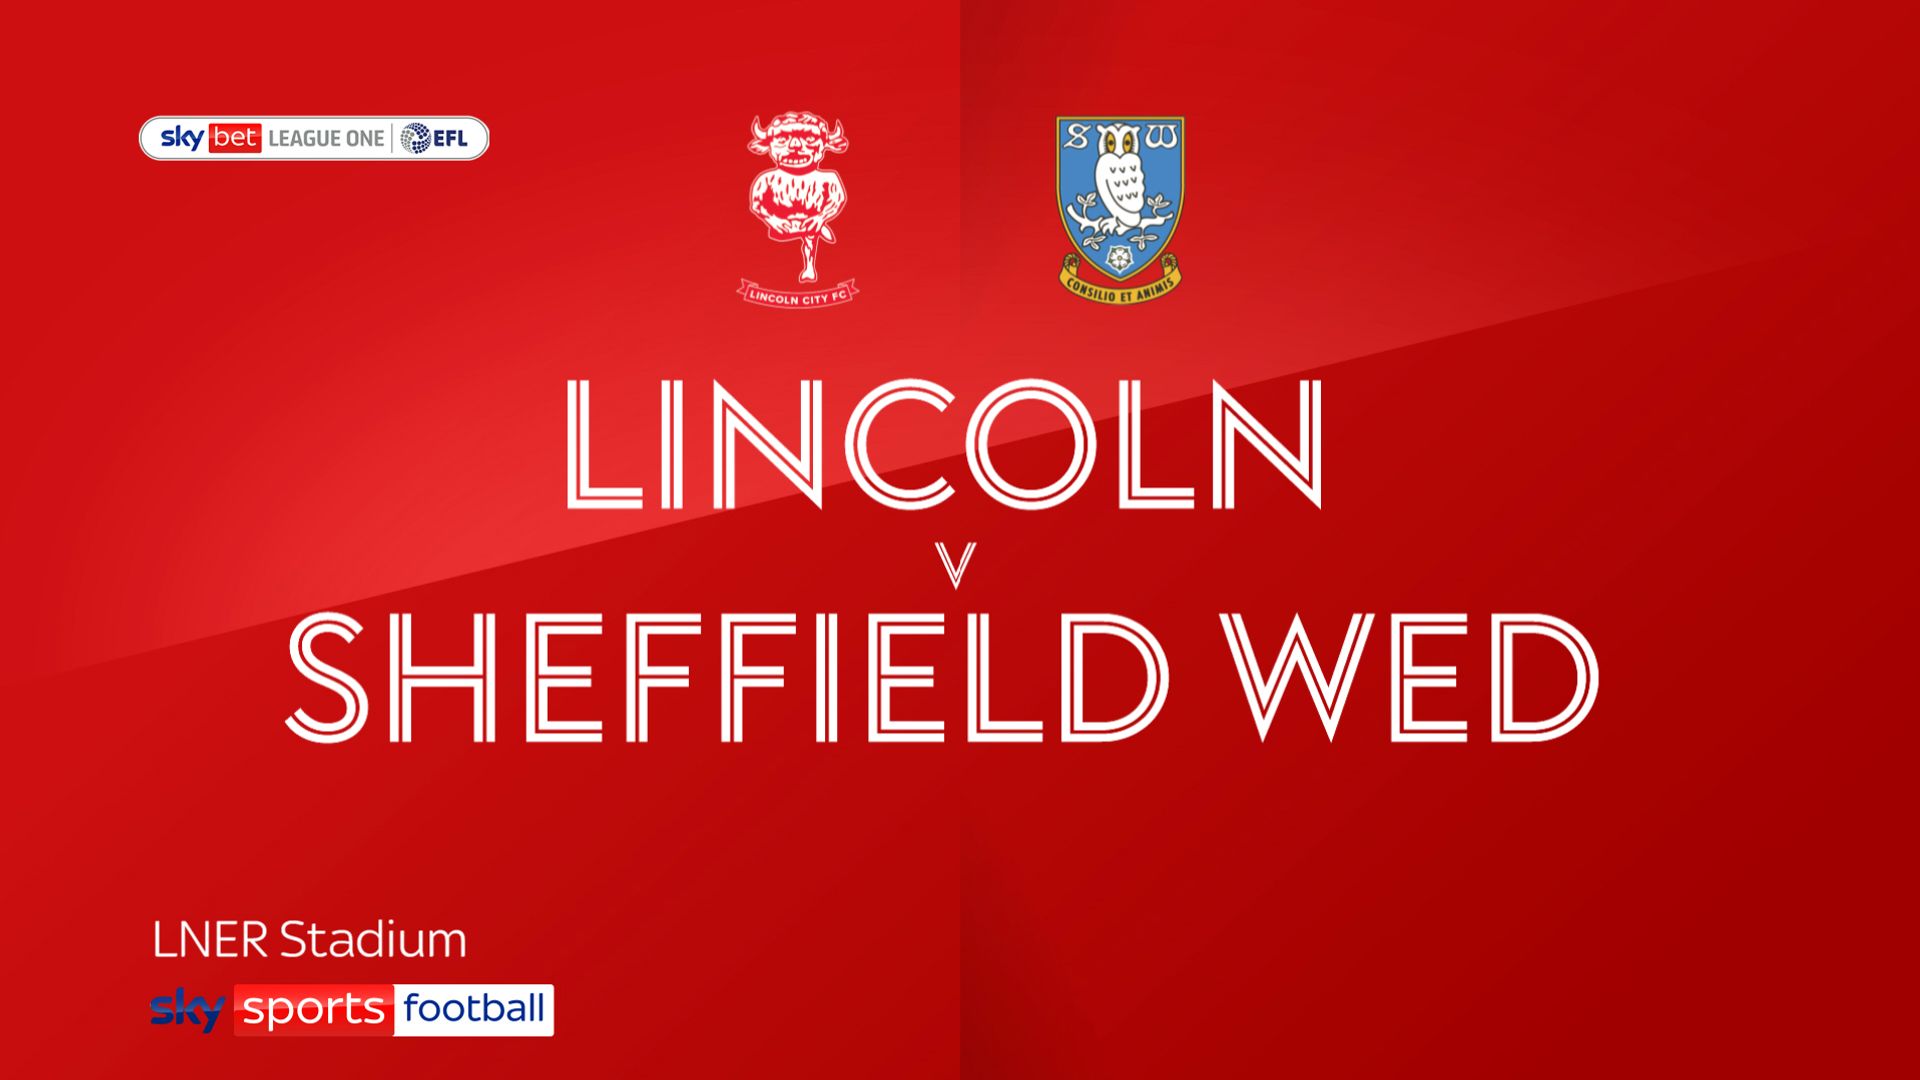 Sheff Wed held by Lincoln